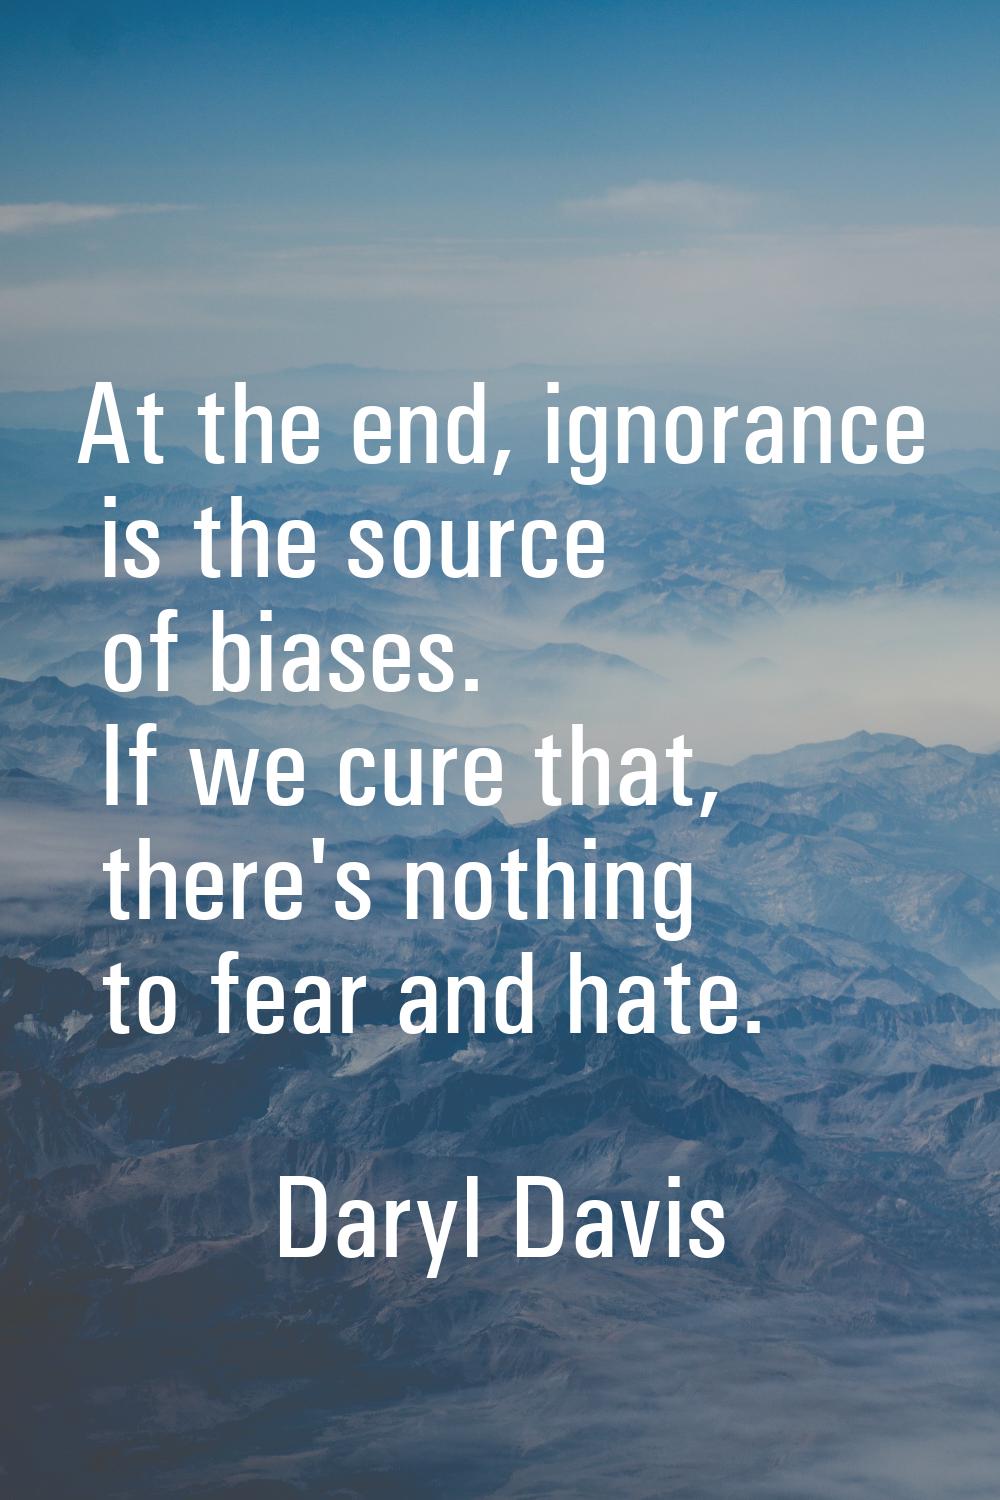 At the end, ignorance is the source of biases. If we cure that, there's nothing to fear and hate.